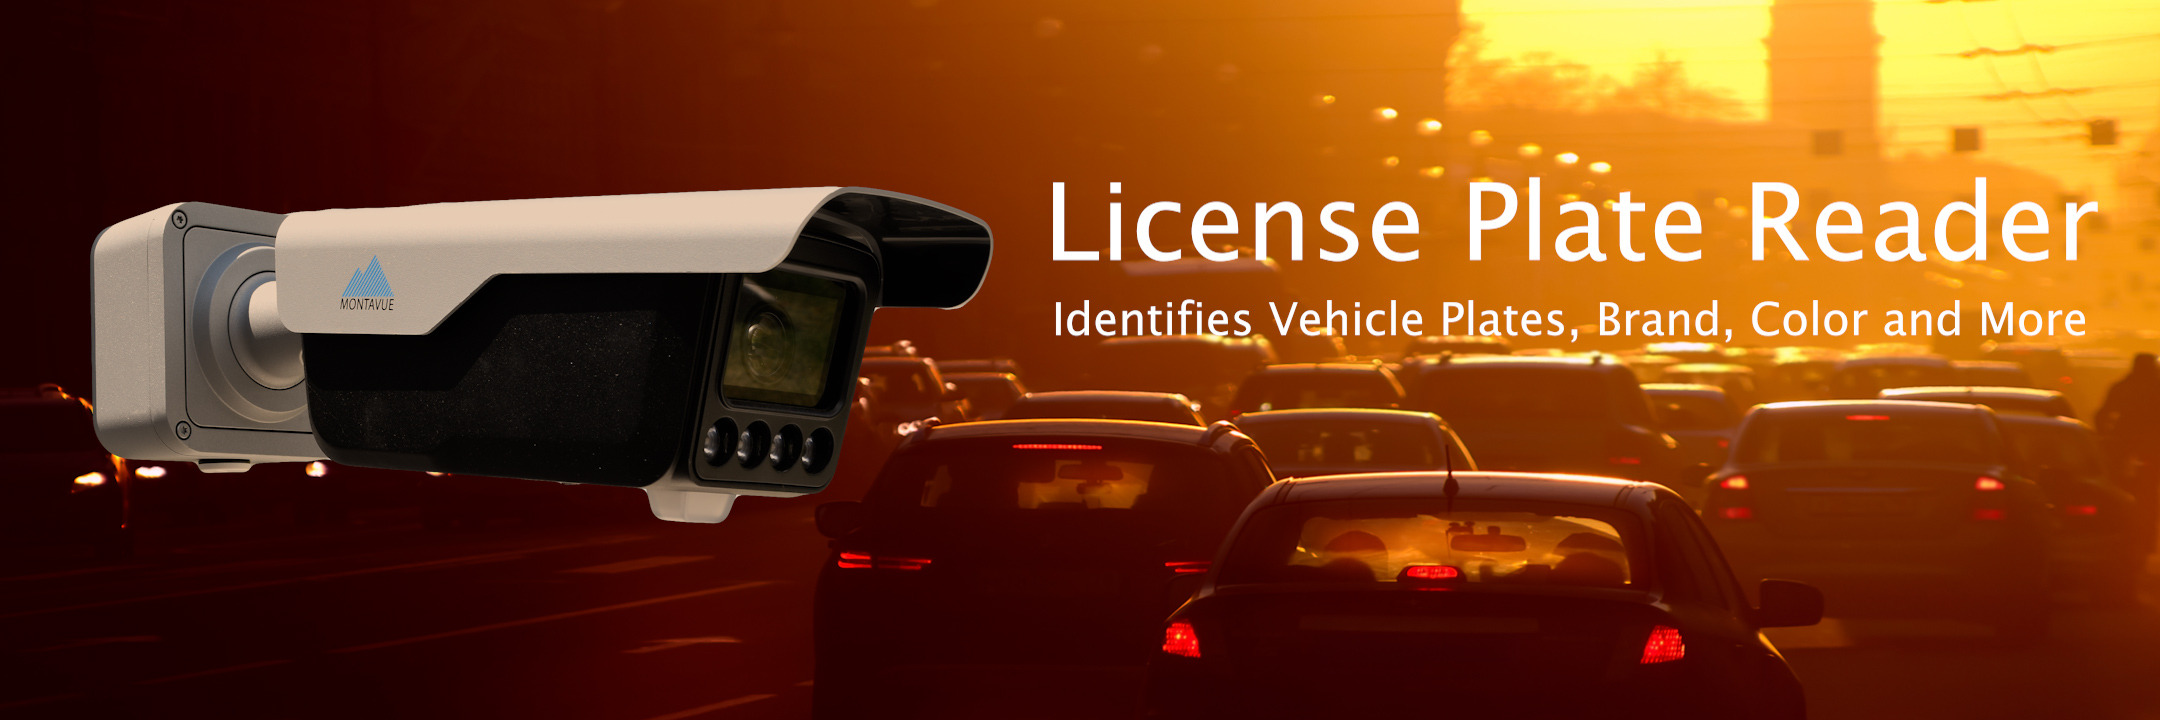 License plate recognition and reading 4mp camera with motorized zoom